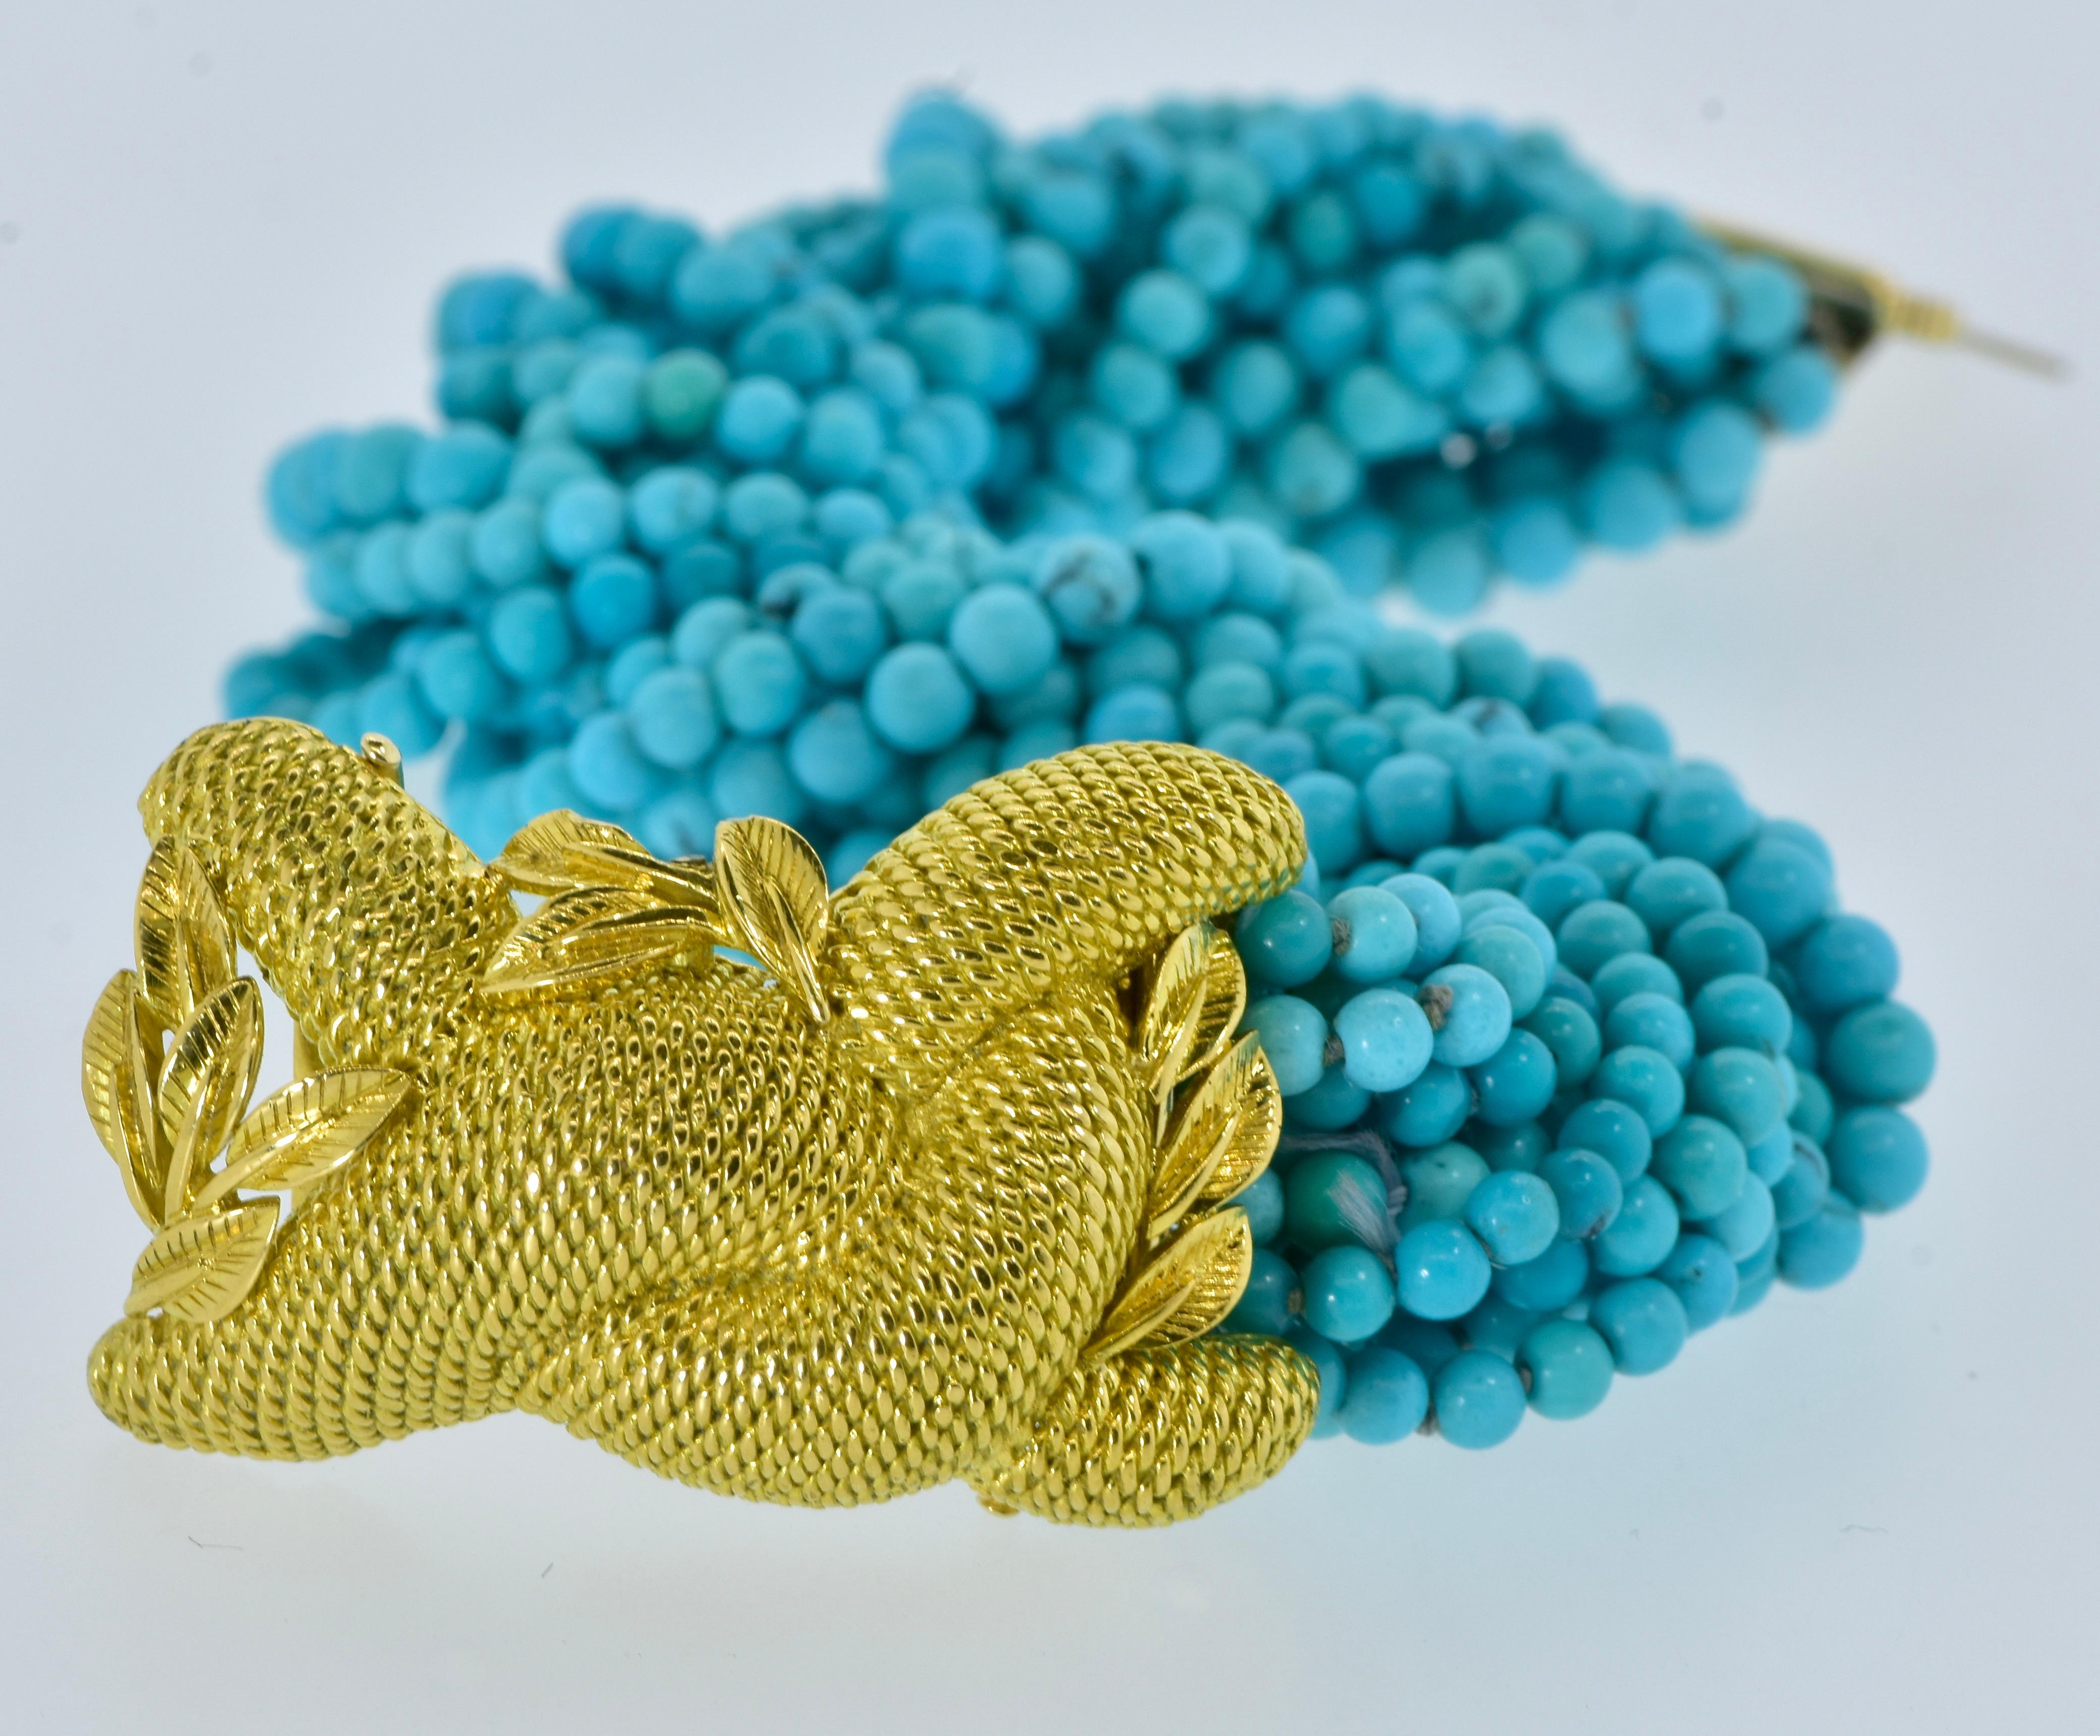 Fine Turquoise Bead Torsade Bracelet Centering an 18K High Relief Clasp, c. 1965 For Sale 10